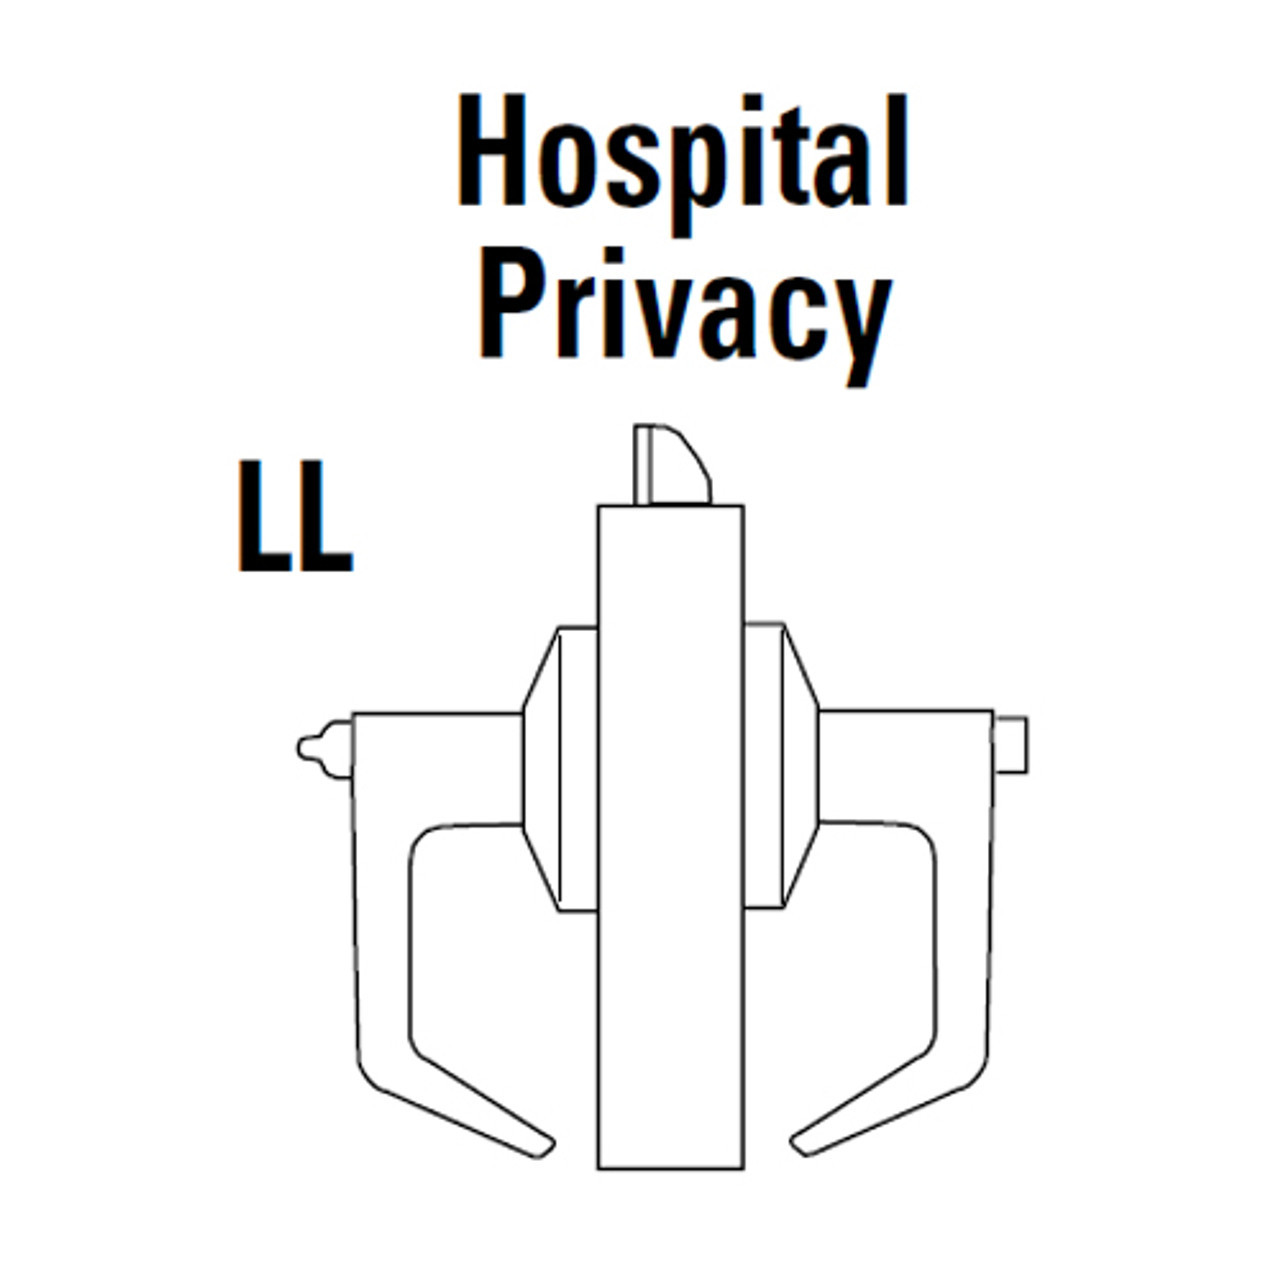 9K30LL14DS3690LM Best 9K Series Hospital Privacy Heavy Duty Cylindrical Lever Locks in Dark Bronze